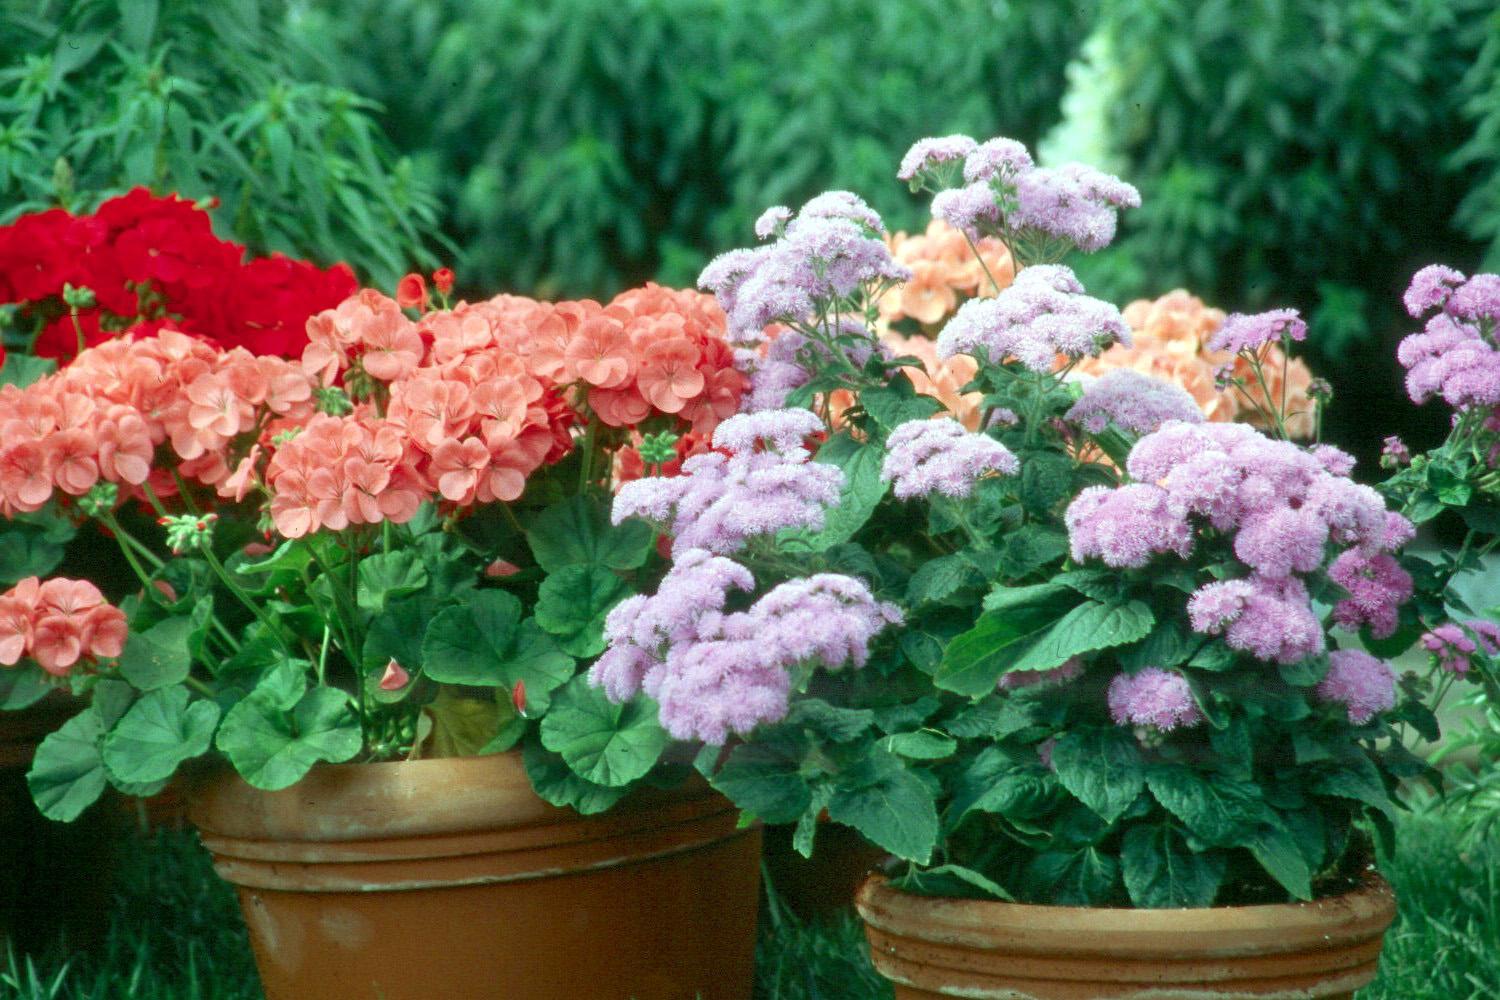 Geraniums come in red plus many new colors  Mississippi State University  Extension Service